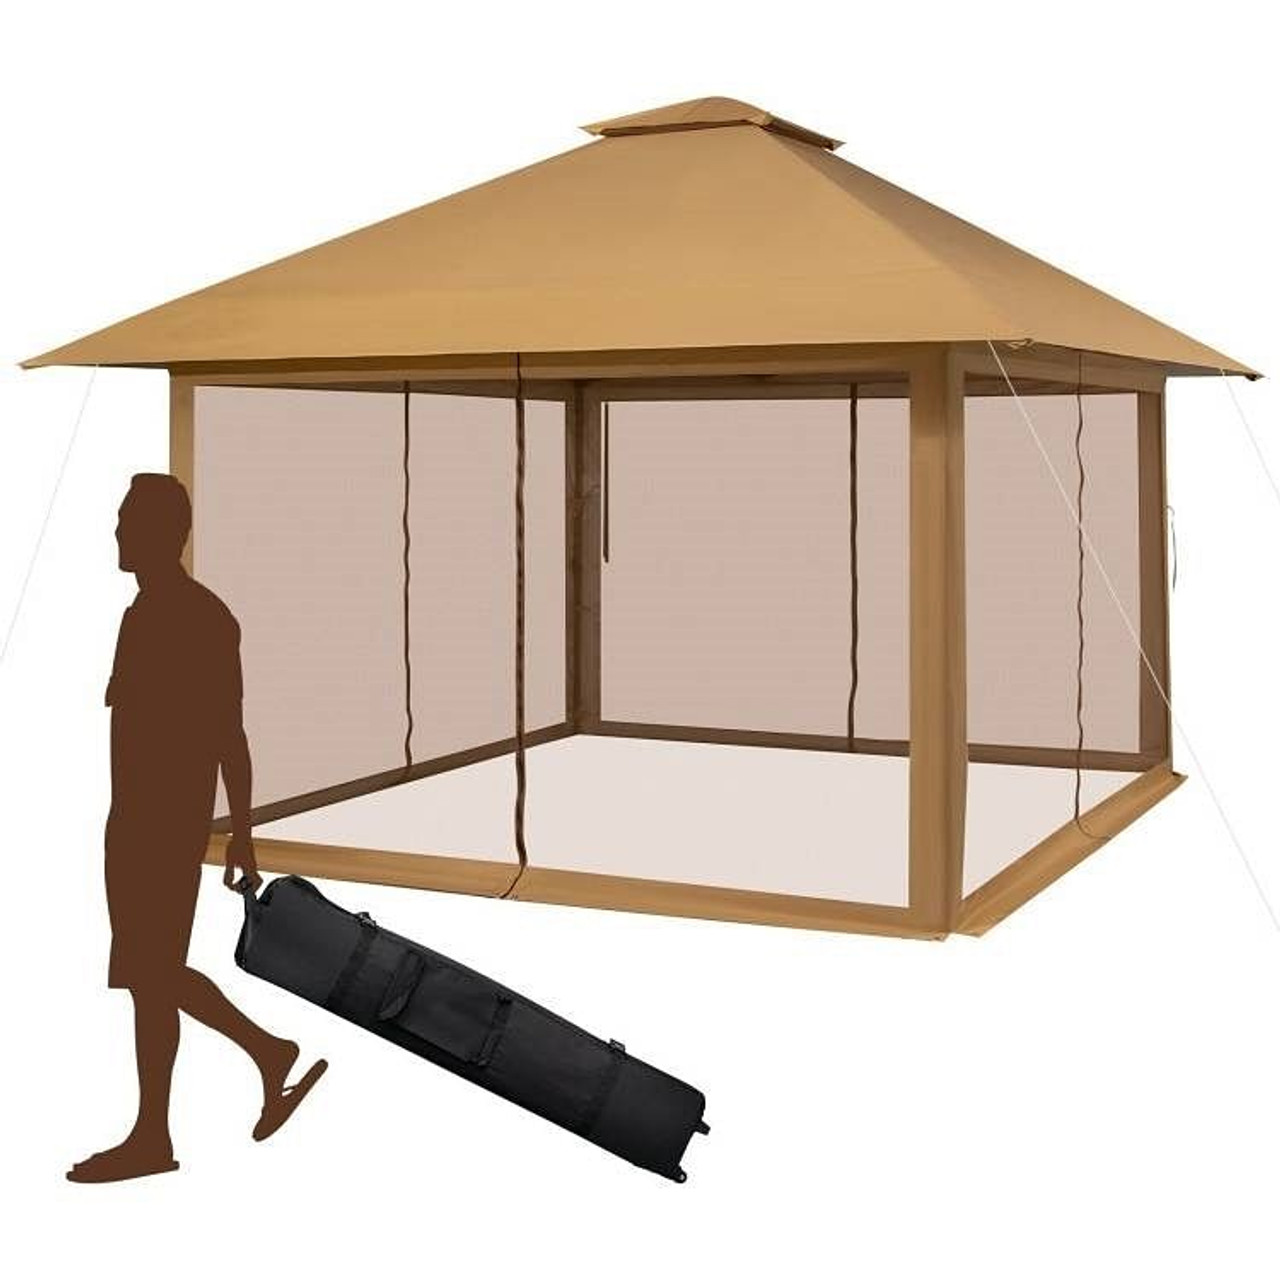 Brown 13 x 13 Ft Pop-Up Gazebo Outdoor Canopy w/ Mesh Mosquito Netting Sidewalls